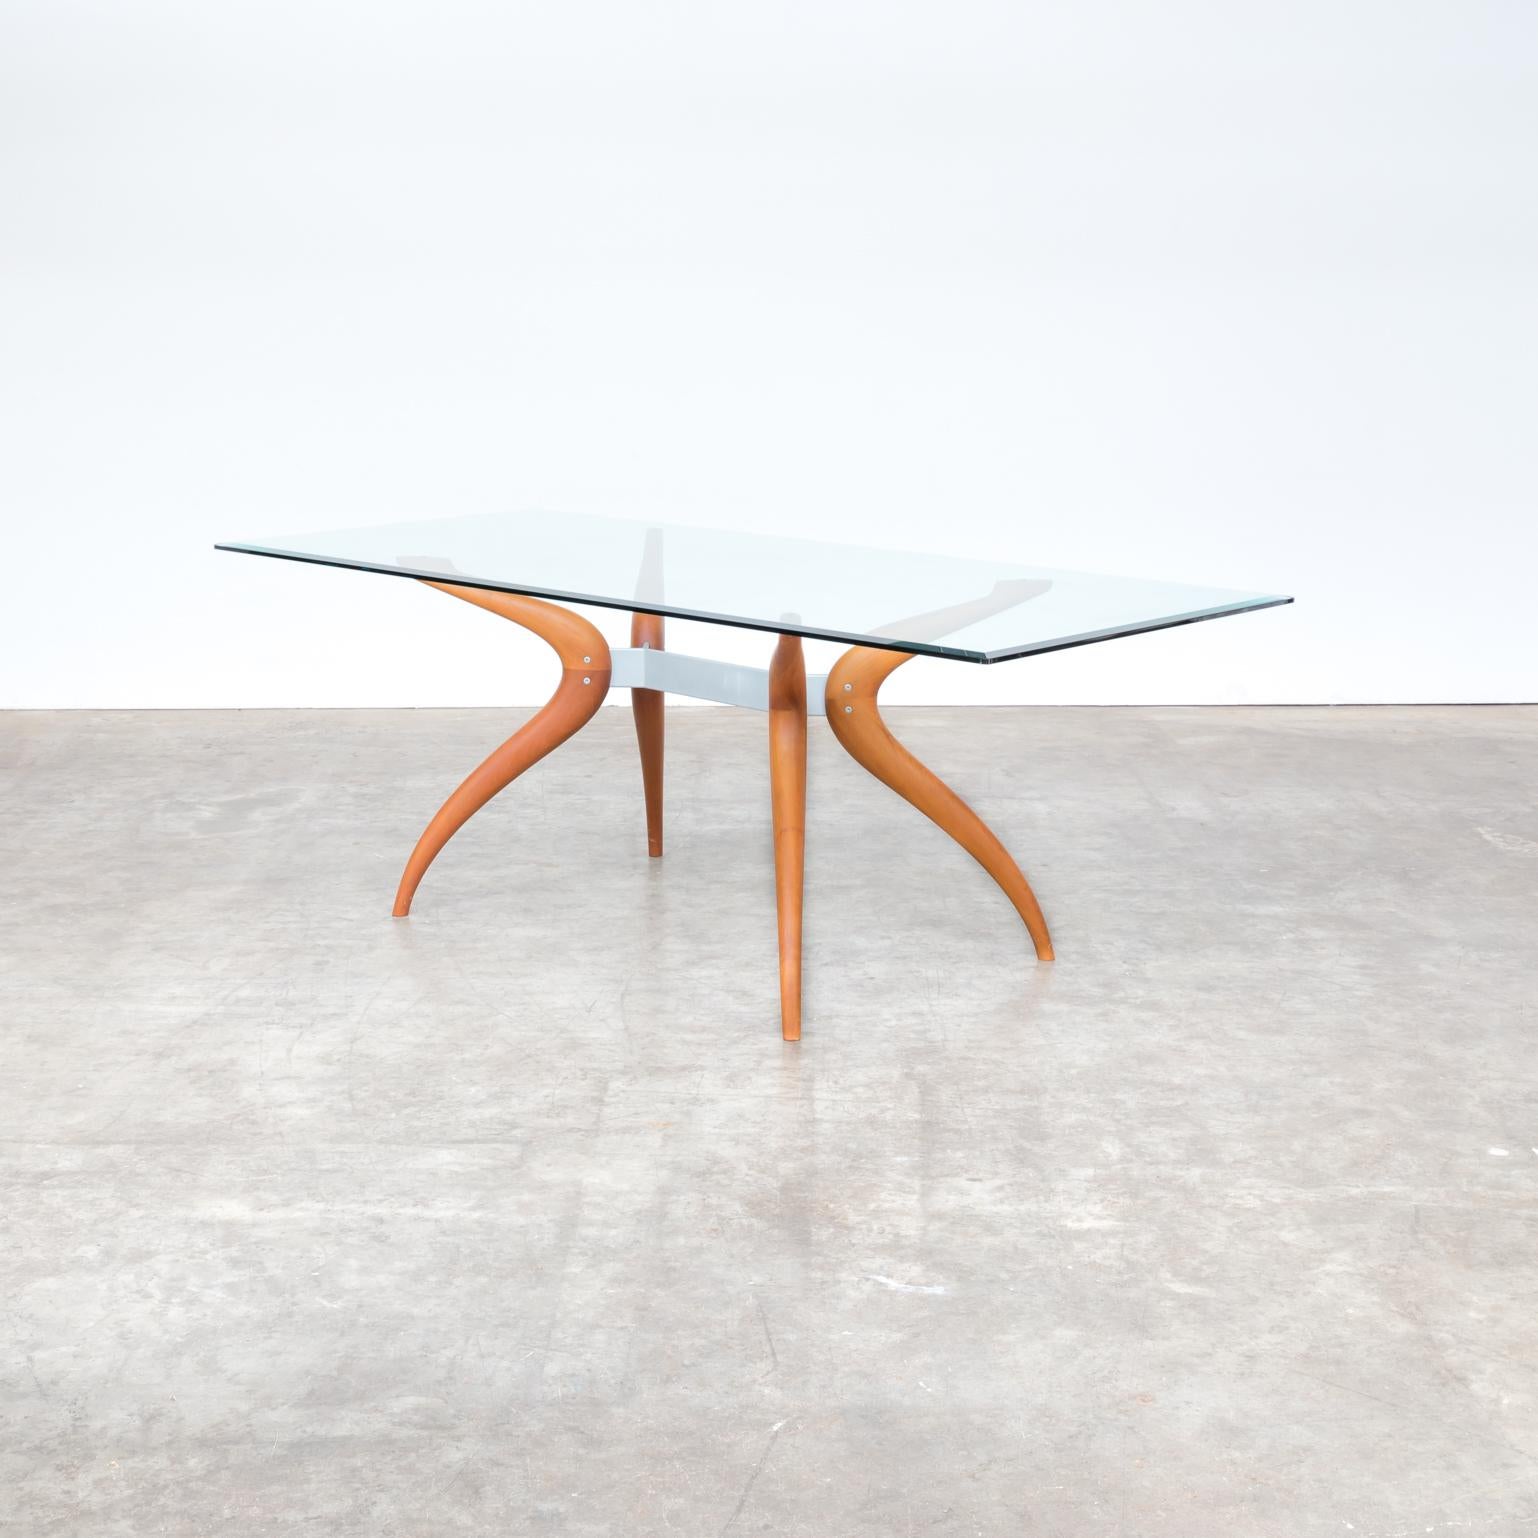 M.Marconato & T. Zappa ‘Retro’ Walnut and Glass Dining Table for Porada In Good Condition For Sale In Amstelveen, Noord